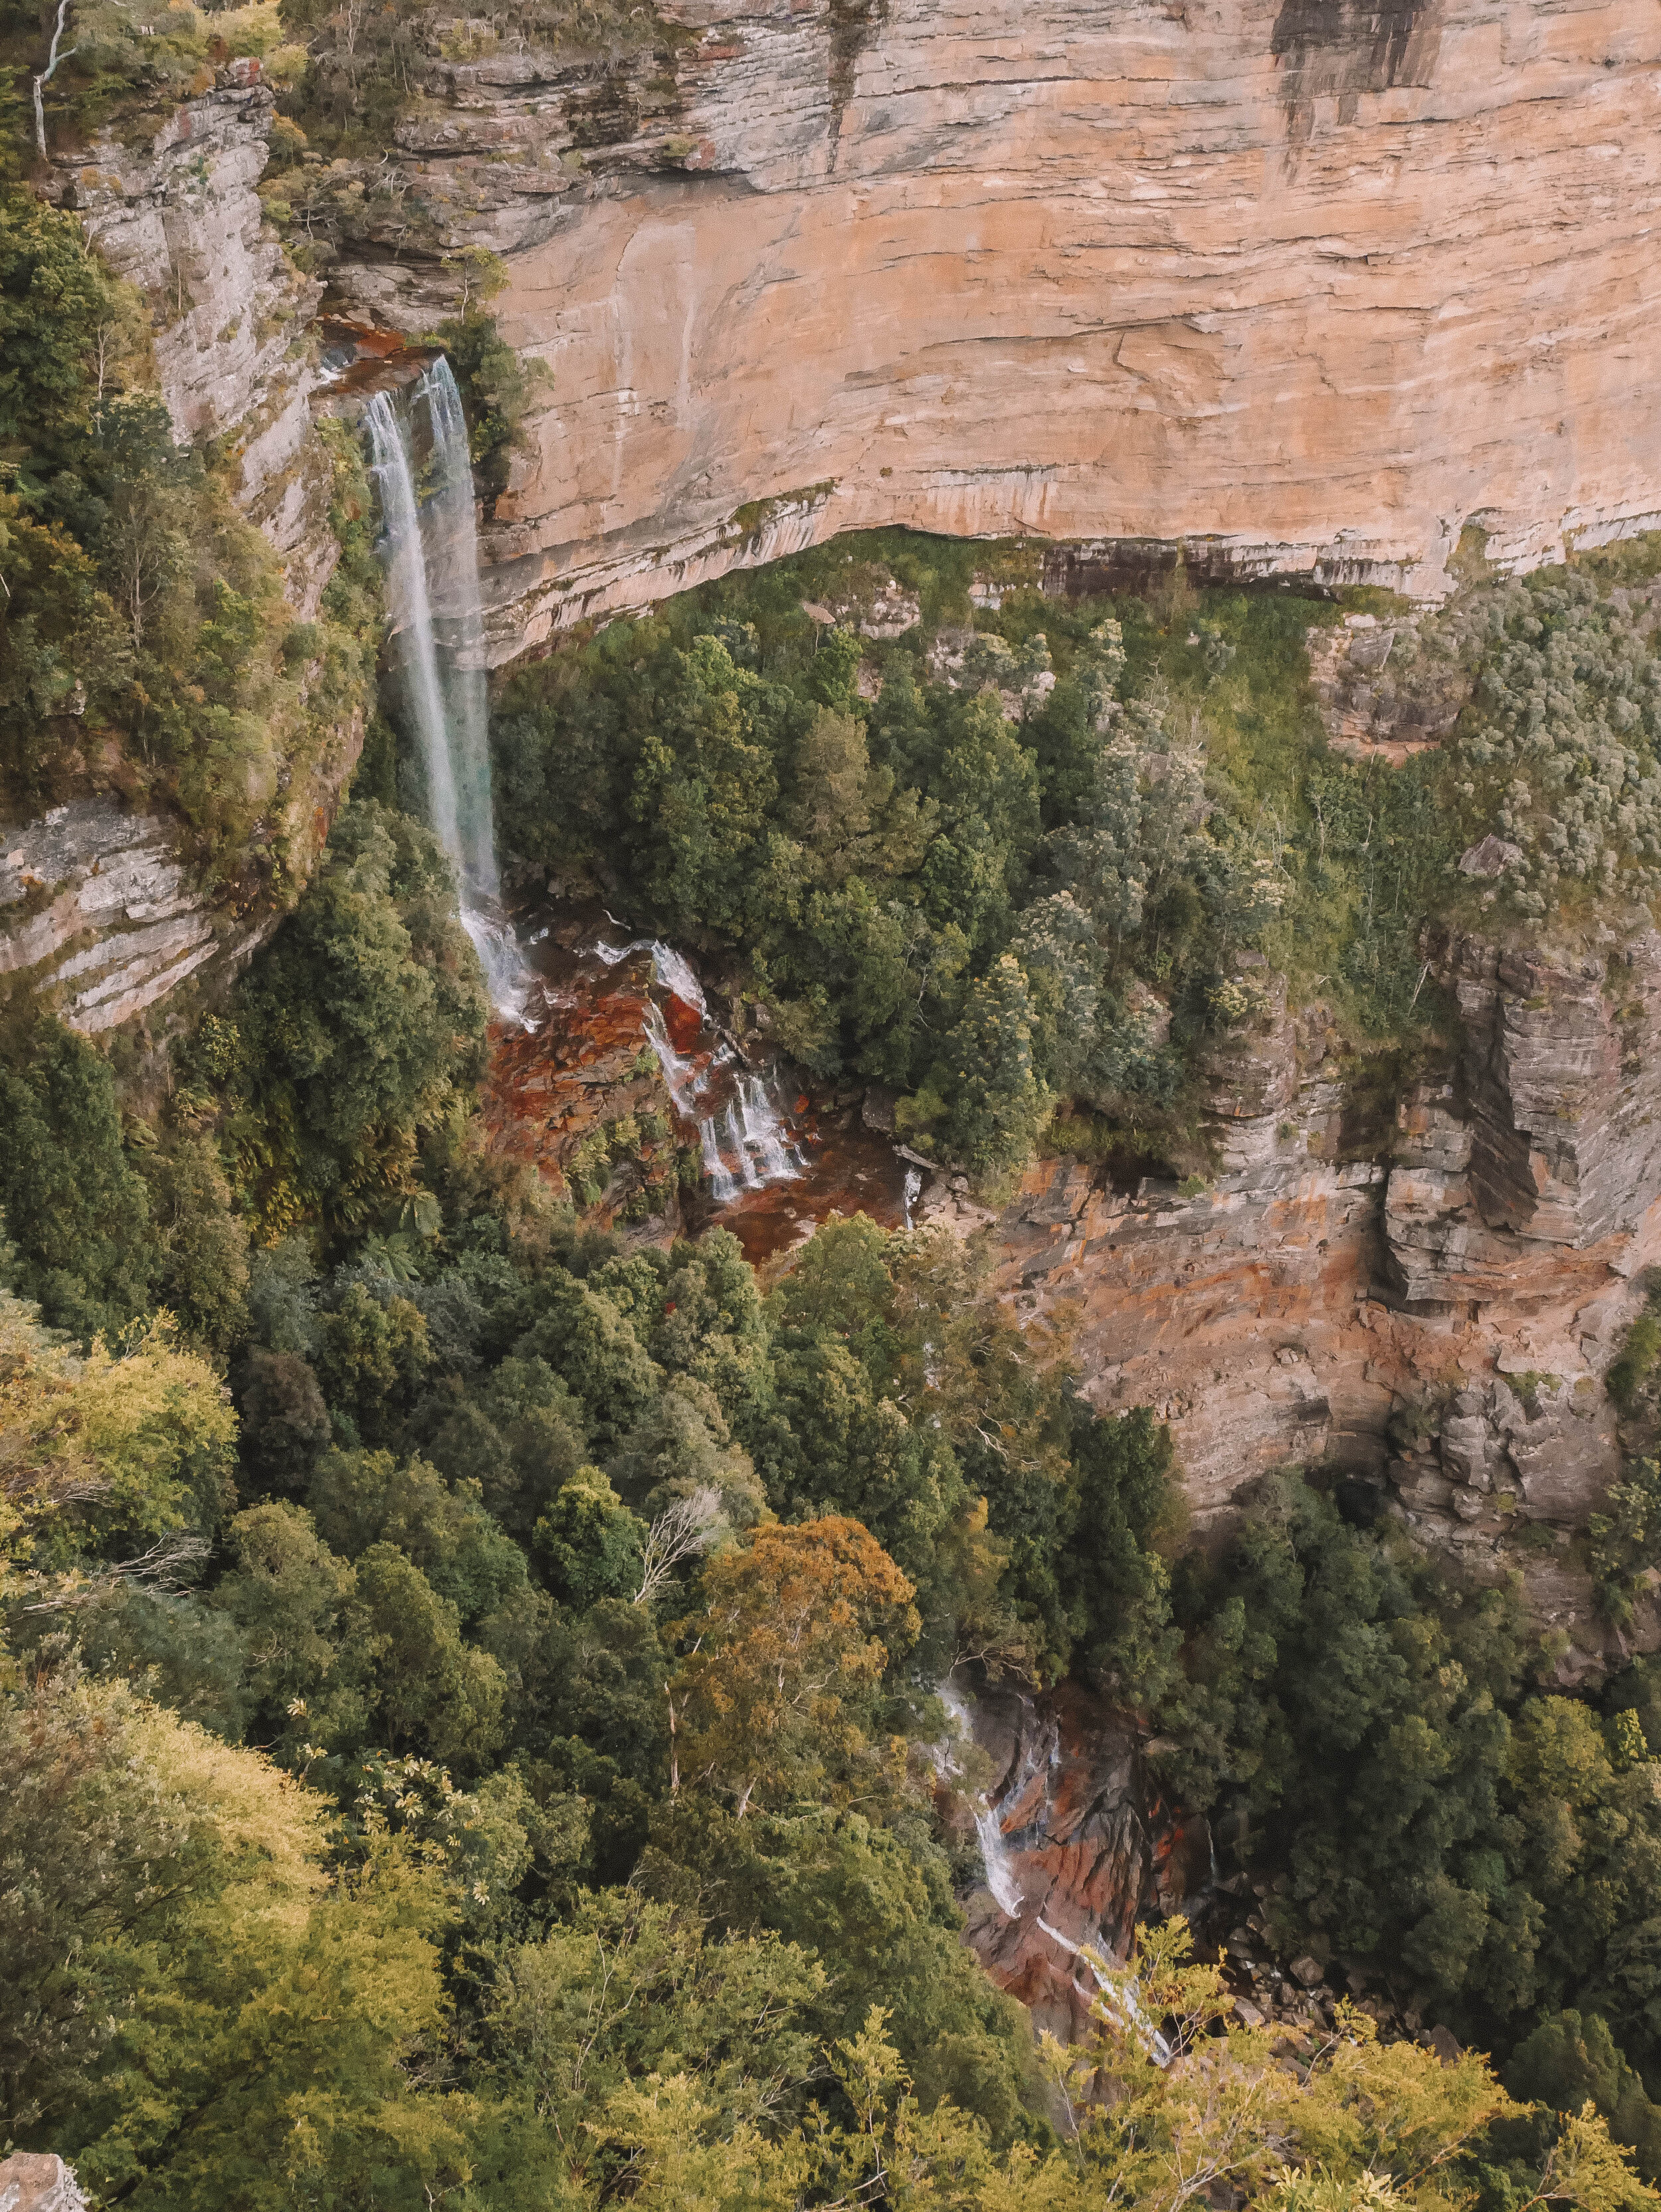 Katoomba Falls seen from above - Blue Mountains - New South Wales (NSW) - Australia